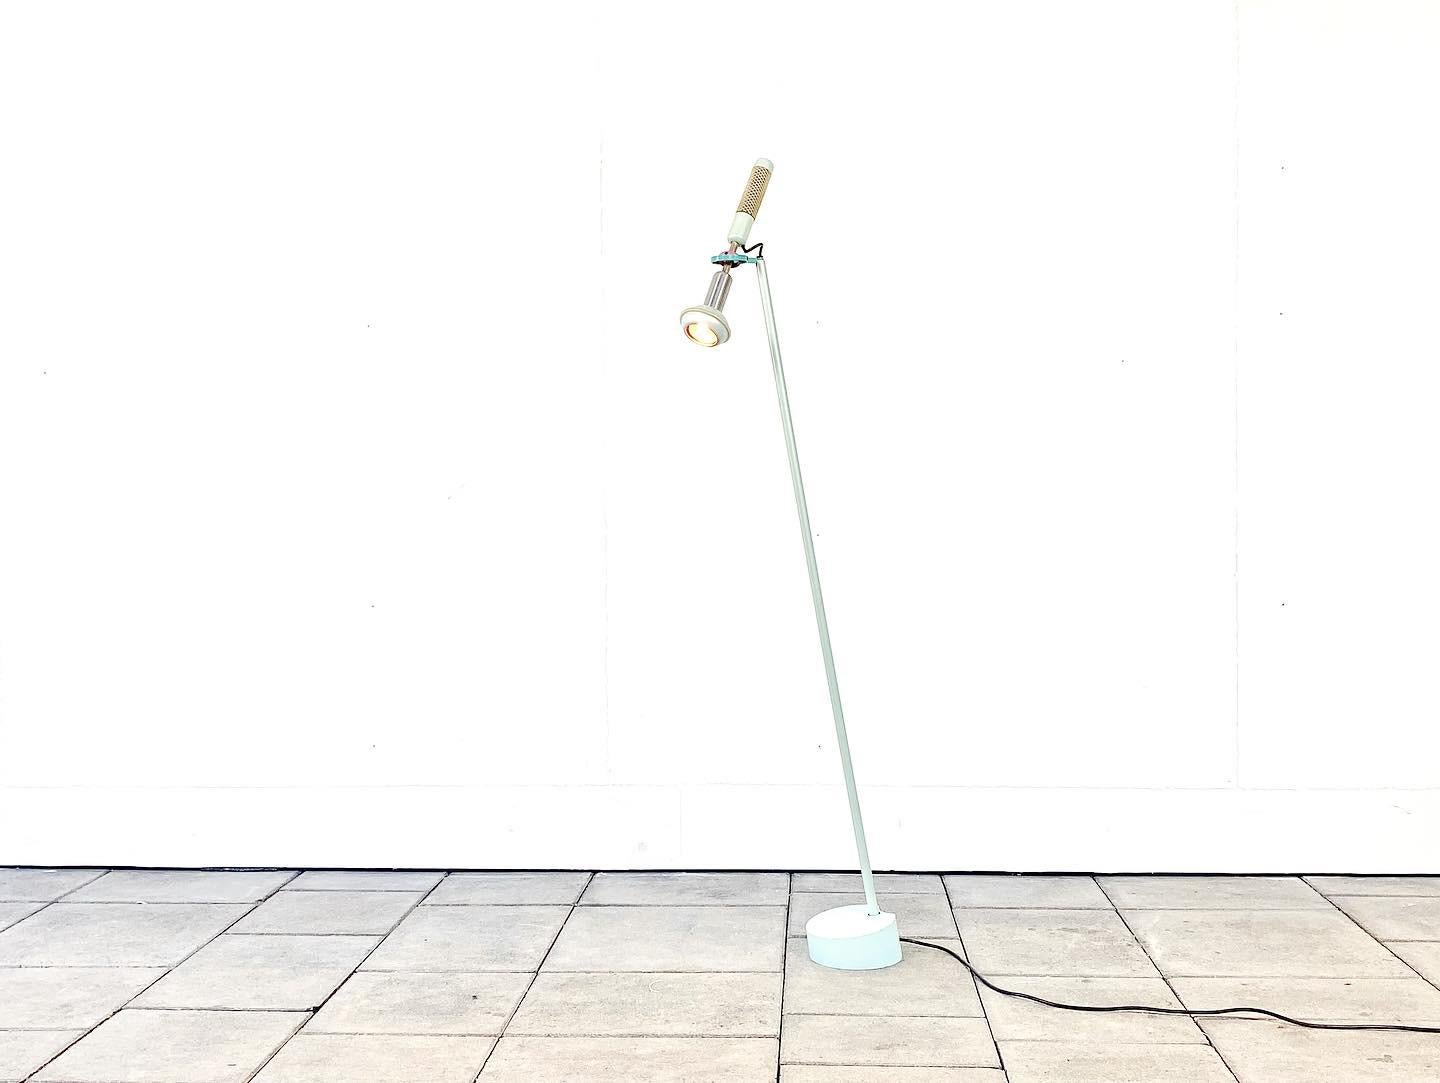 Post-modern Grip floor lamp, designed by Achille Castiglioni, in 1985.

manufactured by Flos, Italy. 

Painted Steel & Aluminum, Plastic. With makers bedge.

The lamp creates a spot light and is perfectly suitable for creating a good